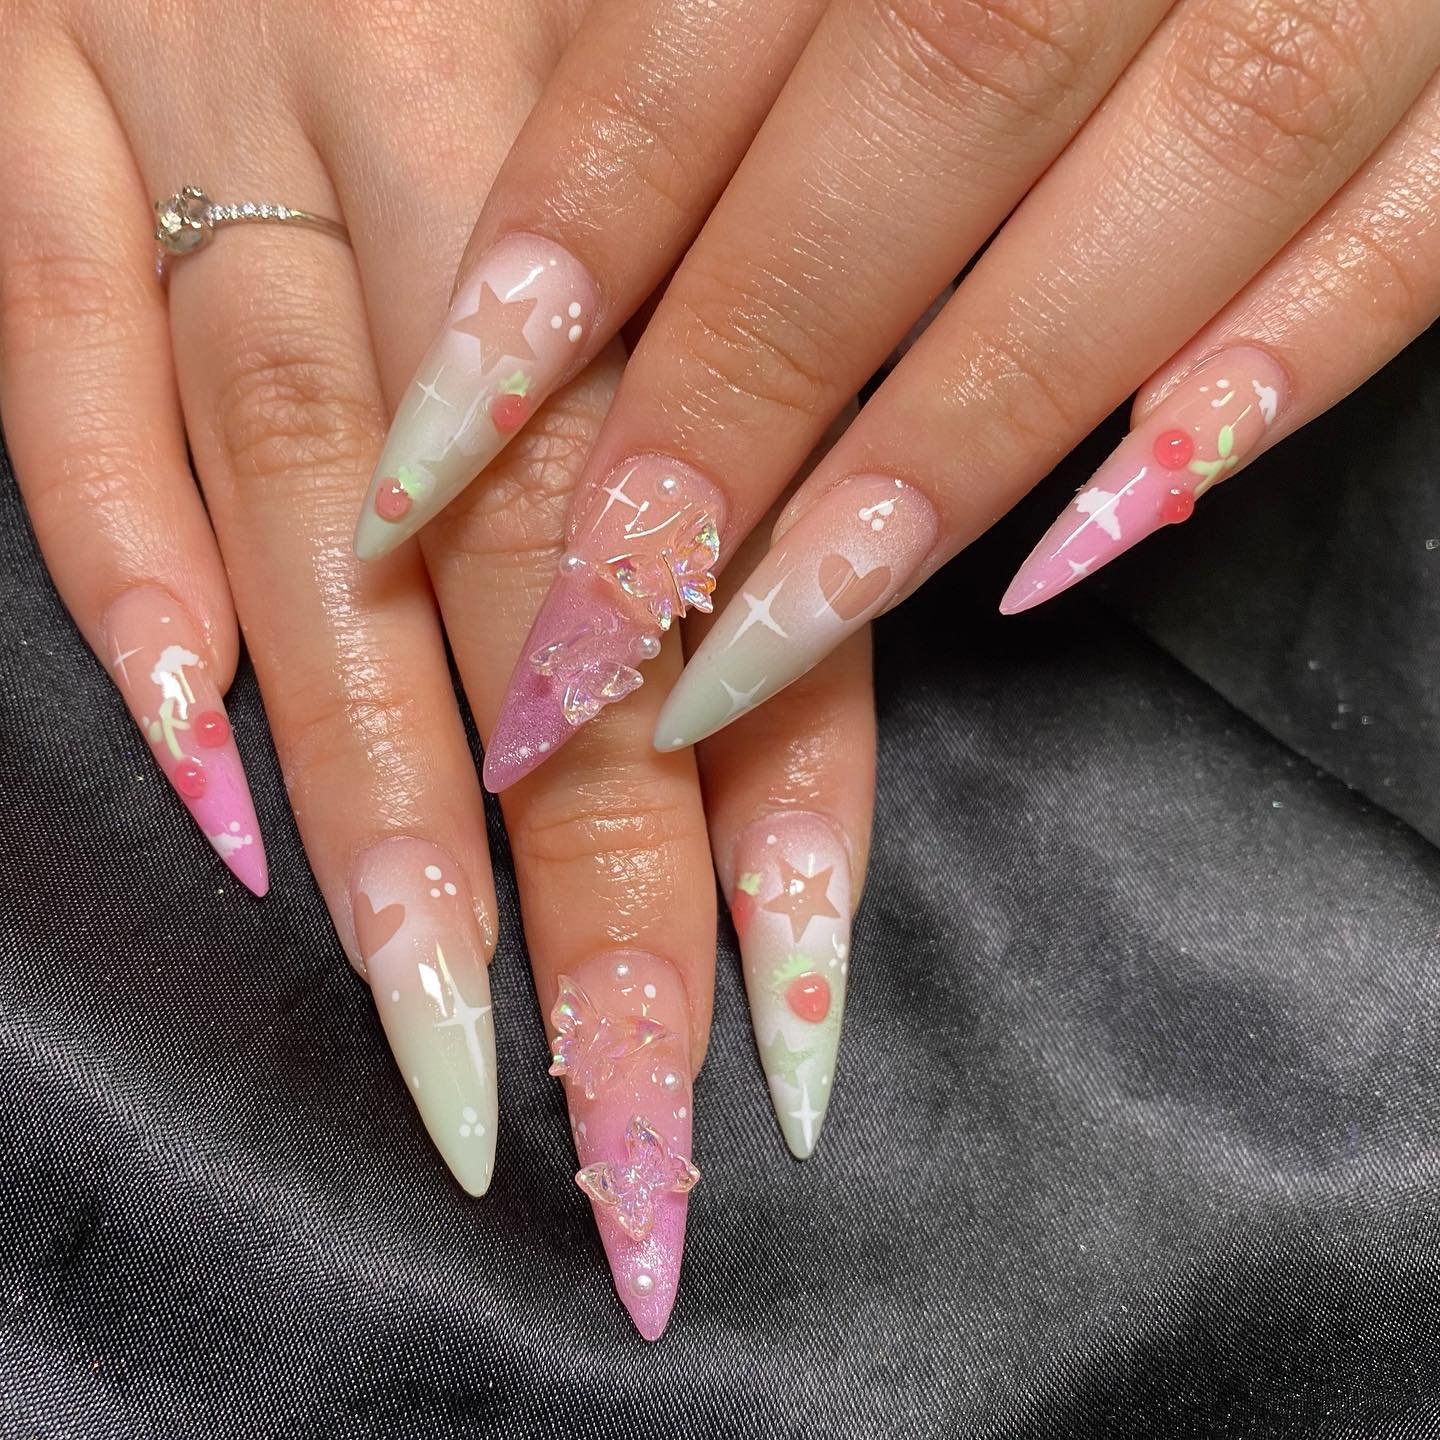 10 - Picture of Acrylic Nails